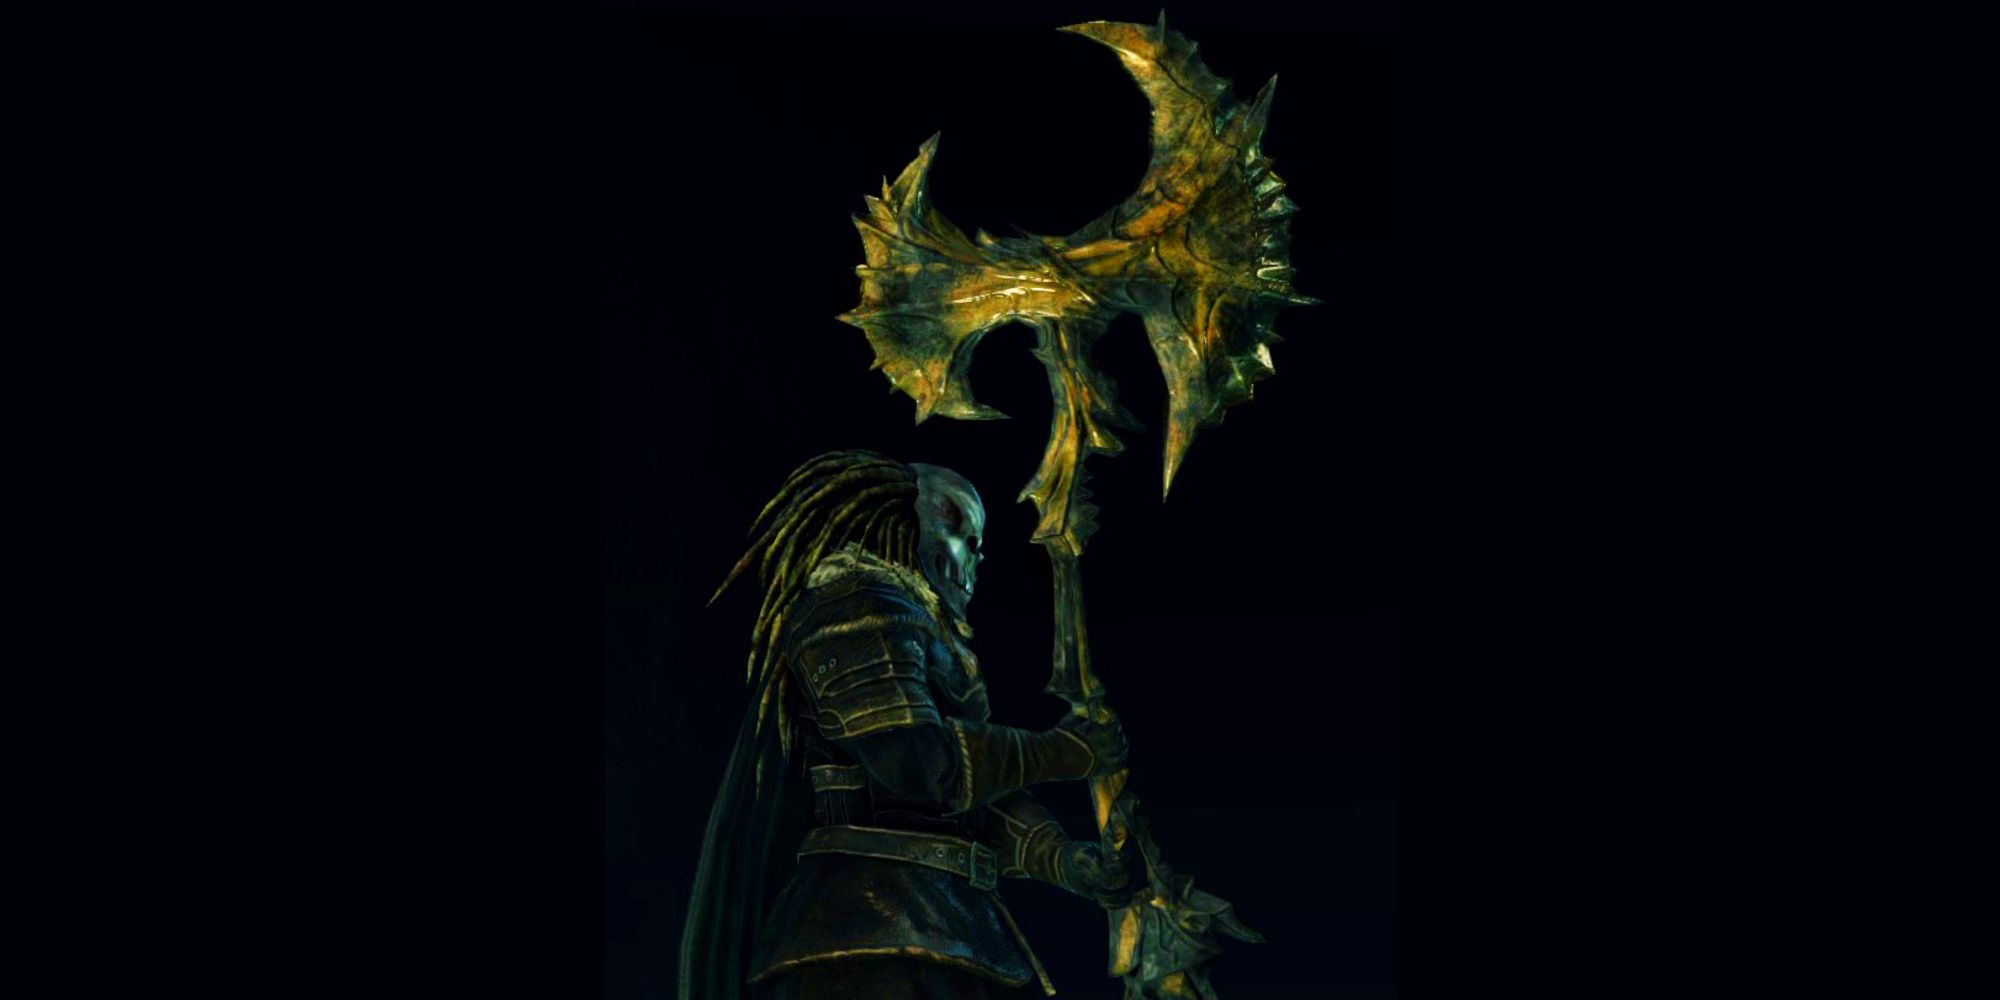 greataxe formed from a black dragon held by the player in a dark area